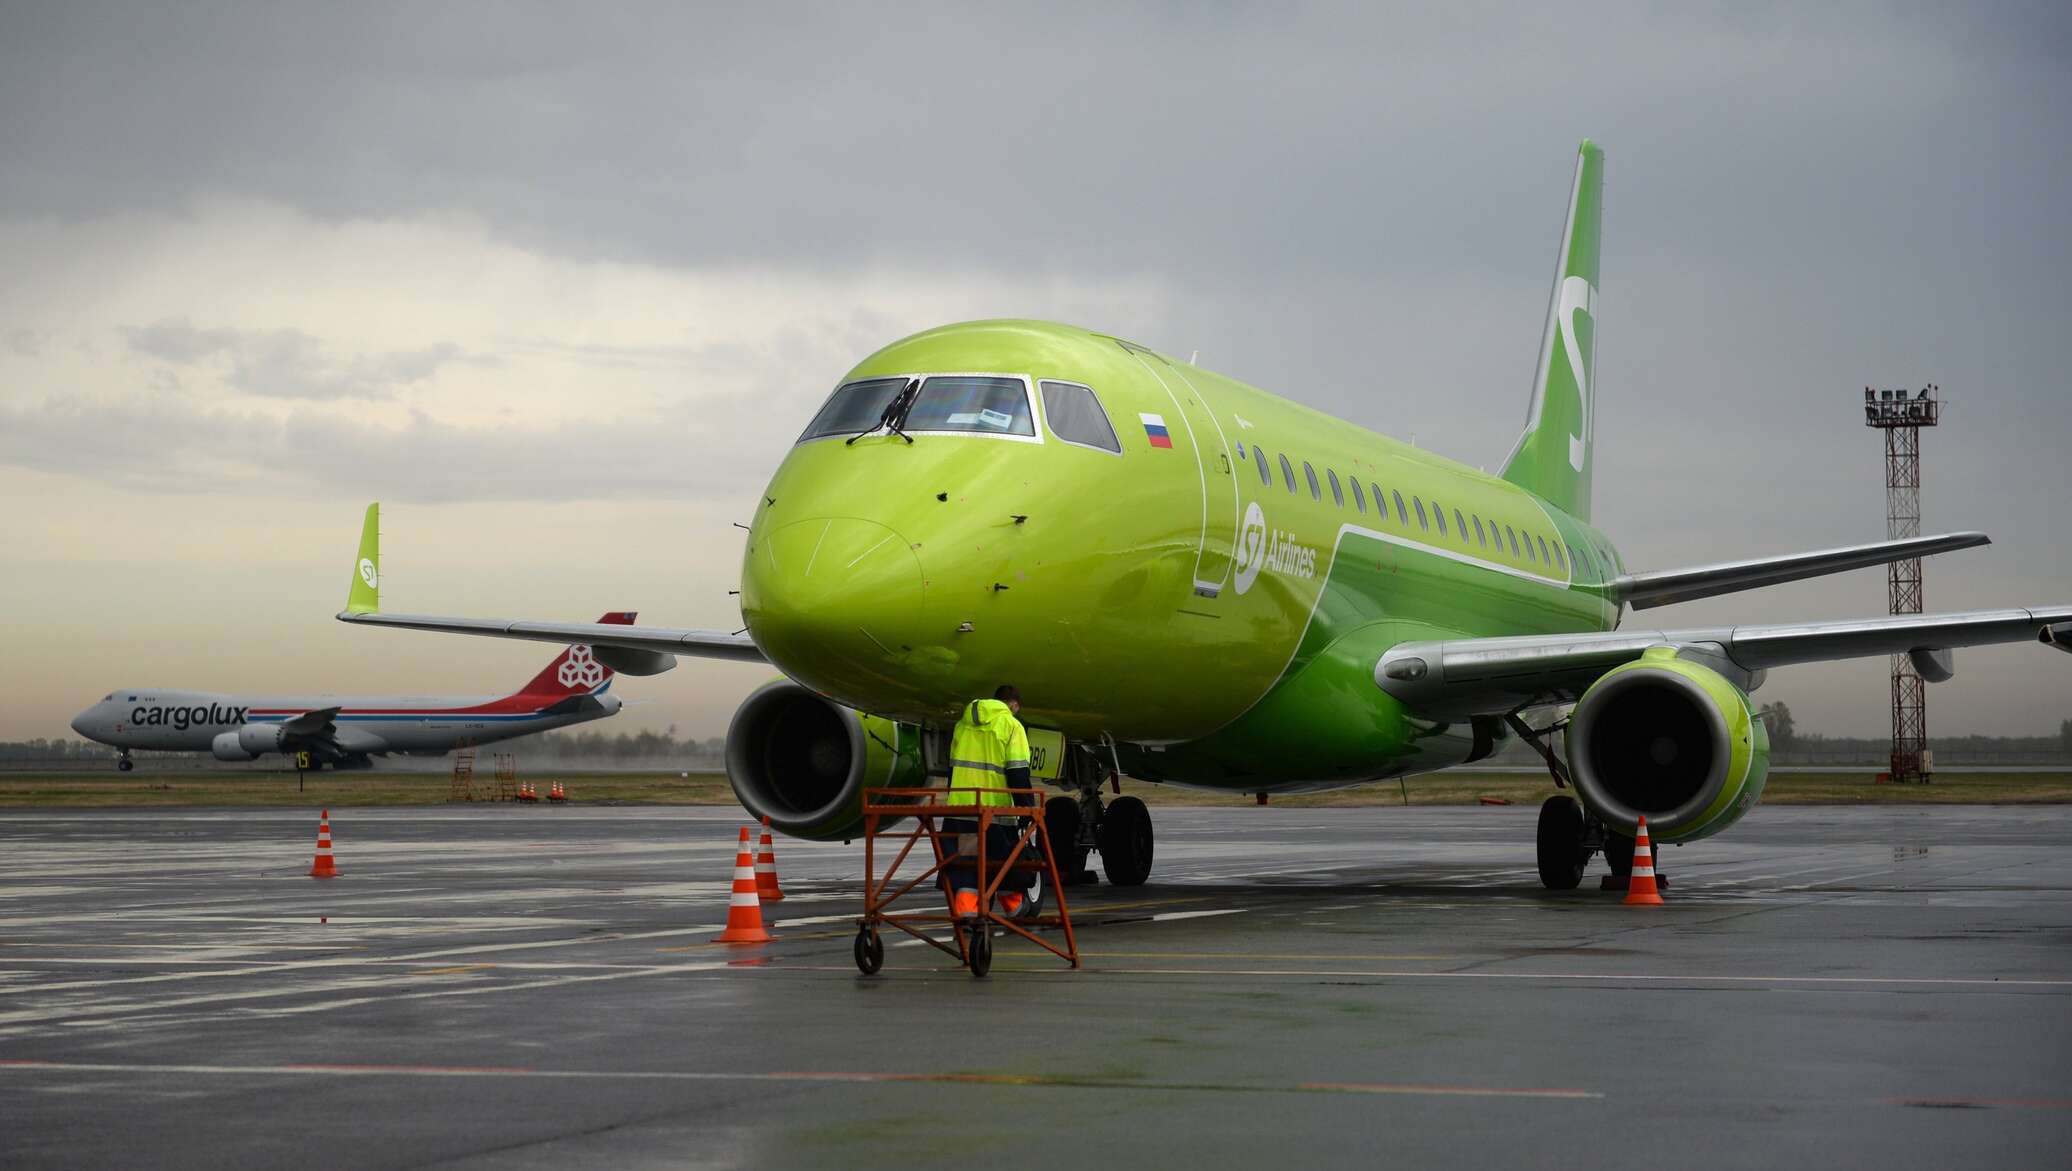 S7 airlines москва. Эмбраер 170. Е-170 самолёт s7. S7 самолеты авиакомпании Эмбраер 170. Эмбраер-170 s7 Краснодар.